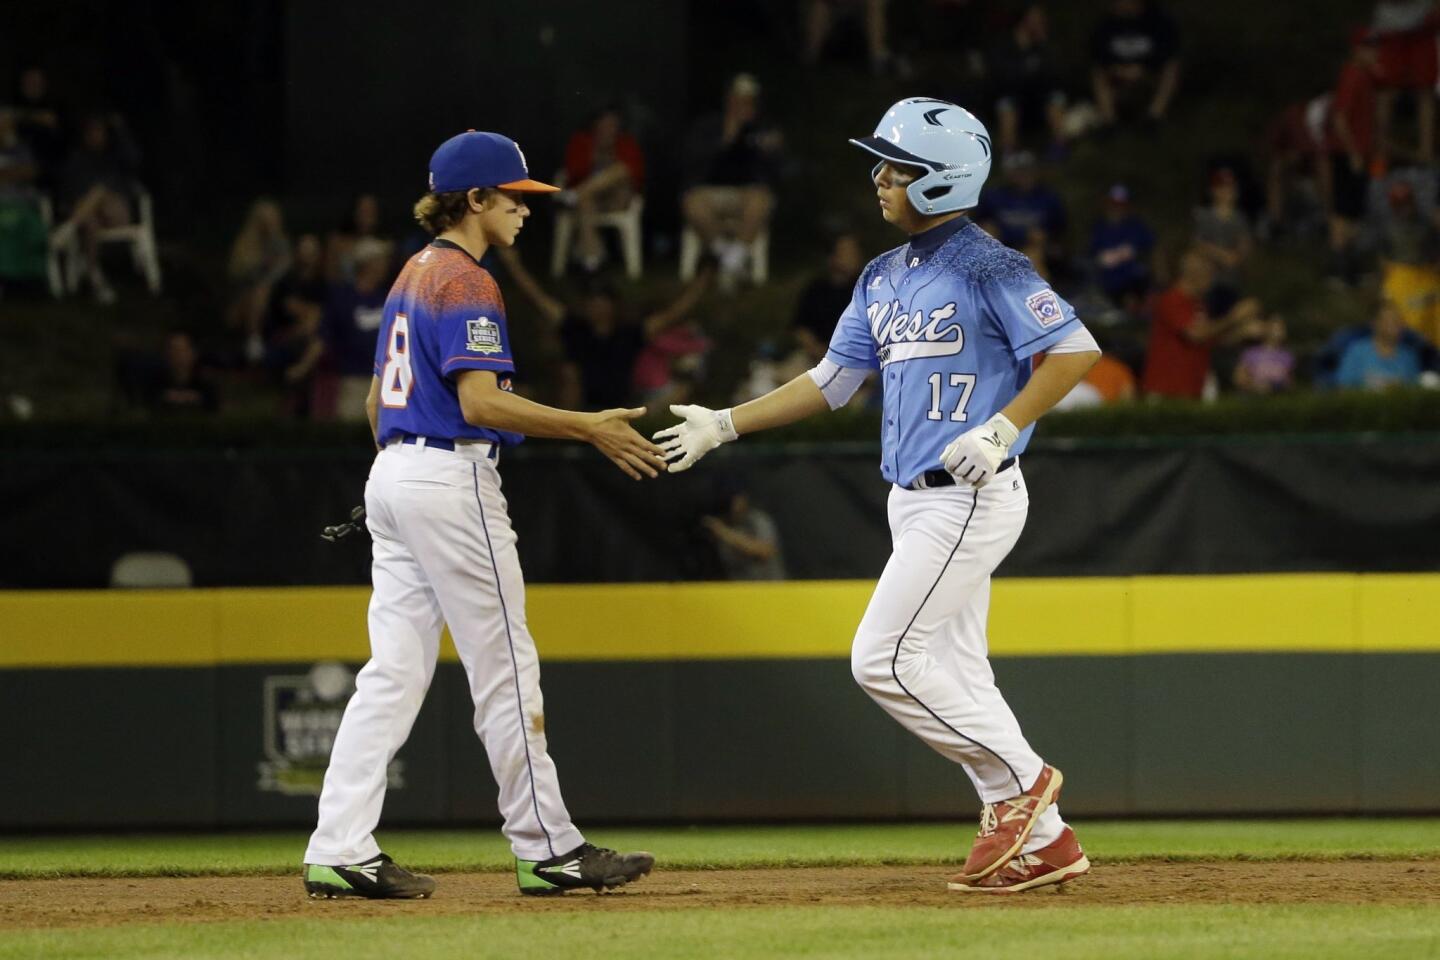 Levi Mendez, right, of Sweetwater Valley, greets Maddox Burr, of Bowling Green, Ky., as Mendez rounds the bases after hitting a two-run home run during the second inning.